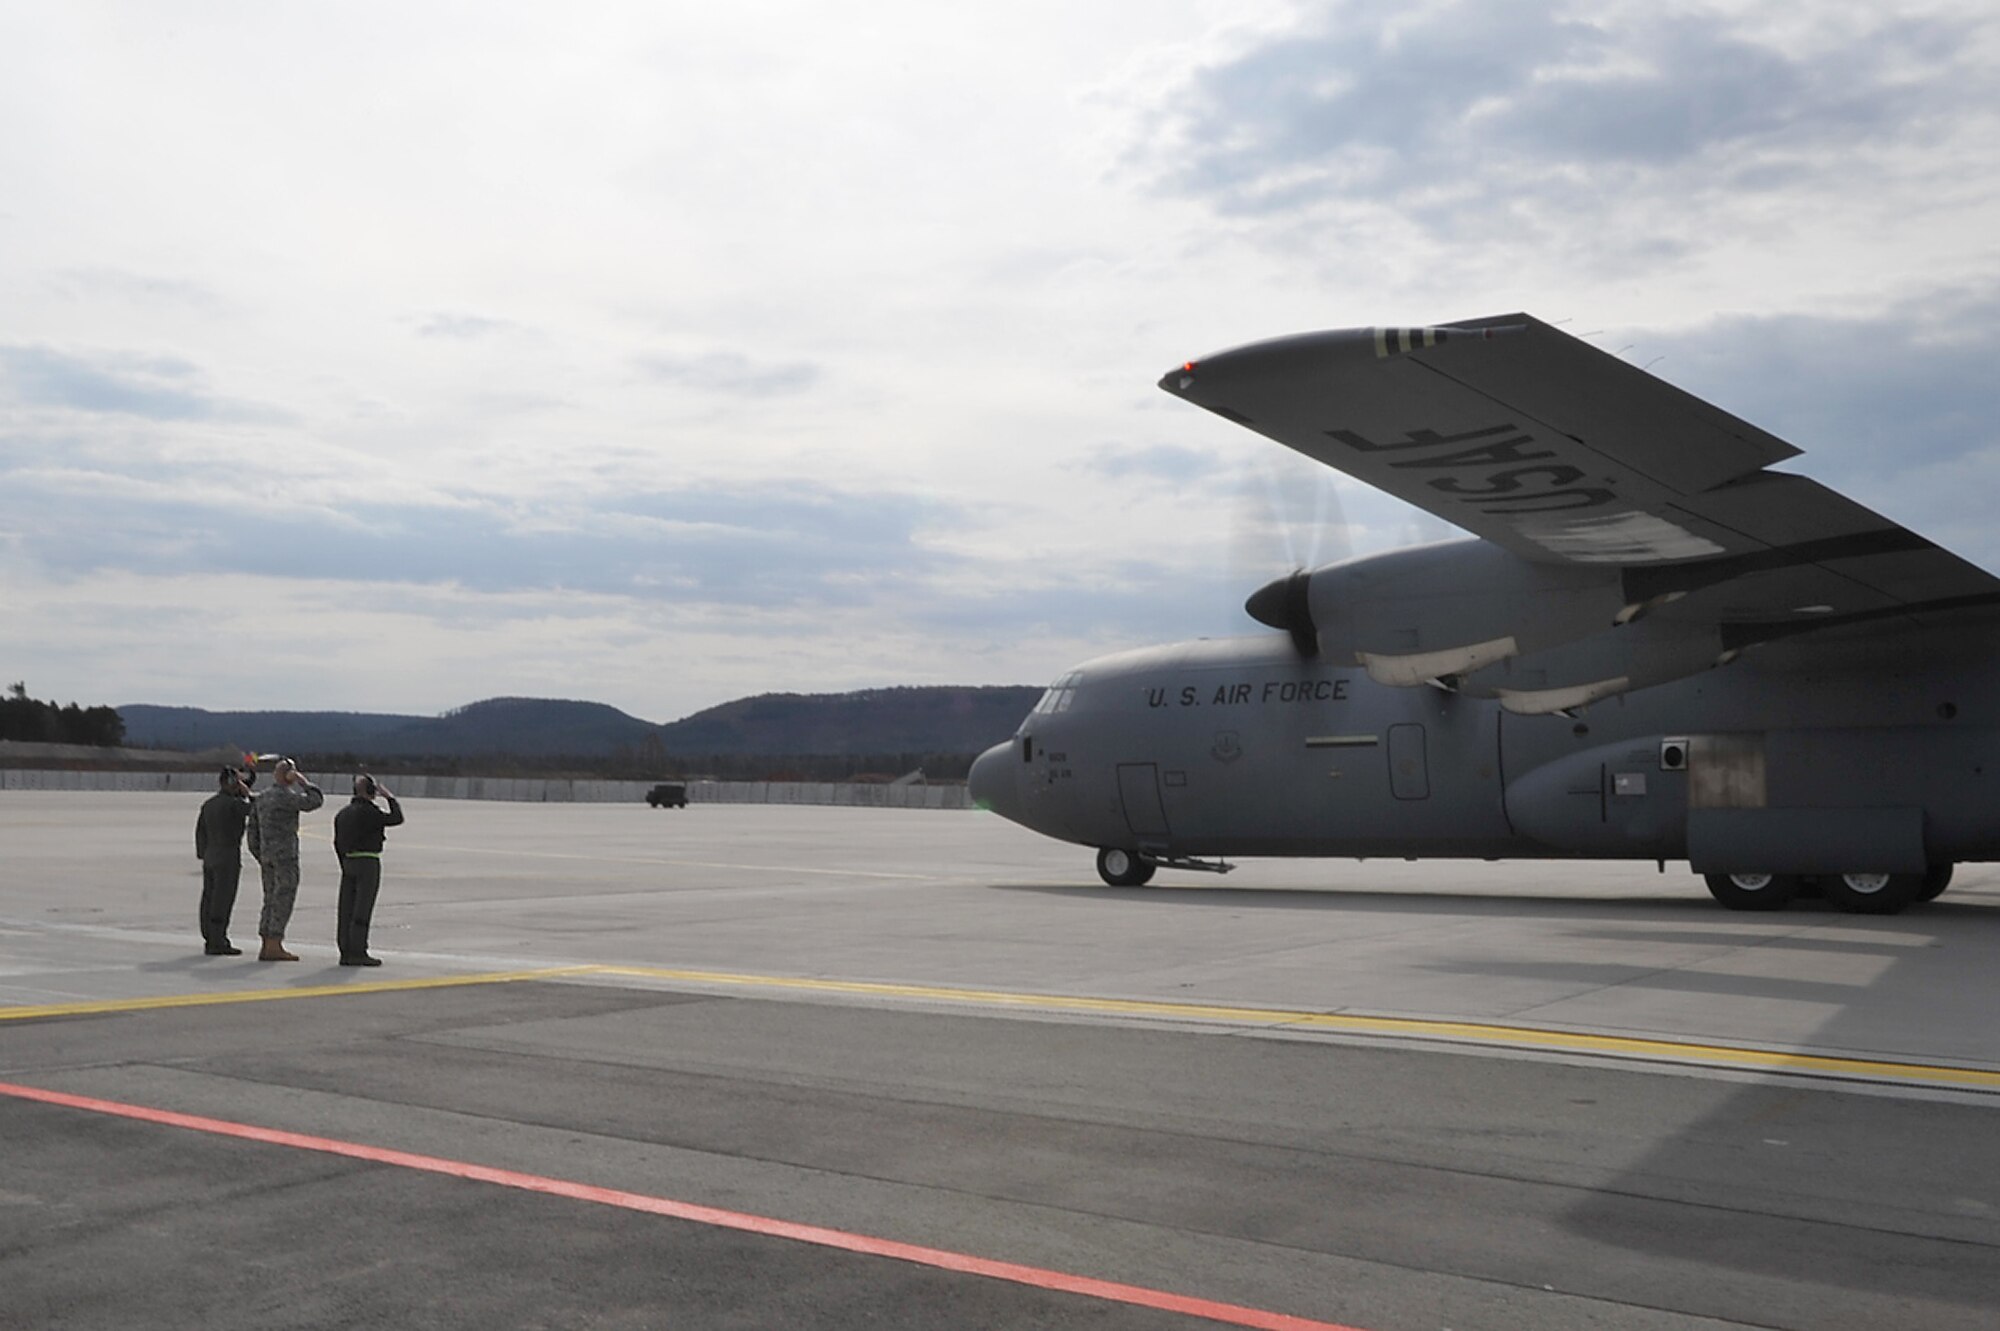 The 13th C-130J Super Hercules is delivered by Maj. Gen. Jack Egginton, Director, Air and Space Operations, Headquarters U.S. Air Forces in Europe, Ramstein Air Base, Germany, March 30, 2010. Fourteen C-130J models will be assigned to Ramstein, replacing the older C-130Es as a part of the Air Force’s priority to revitalize the aircraft fleet. (U.S. Air Force photo by Senior Airman Tony R. Ritter)